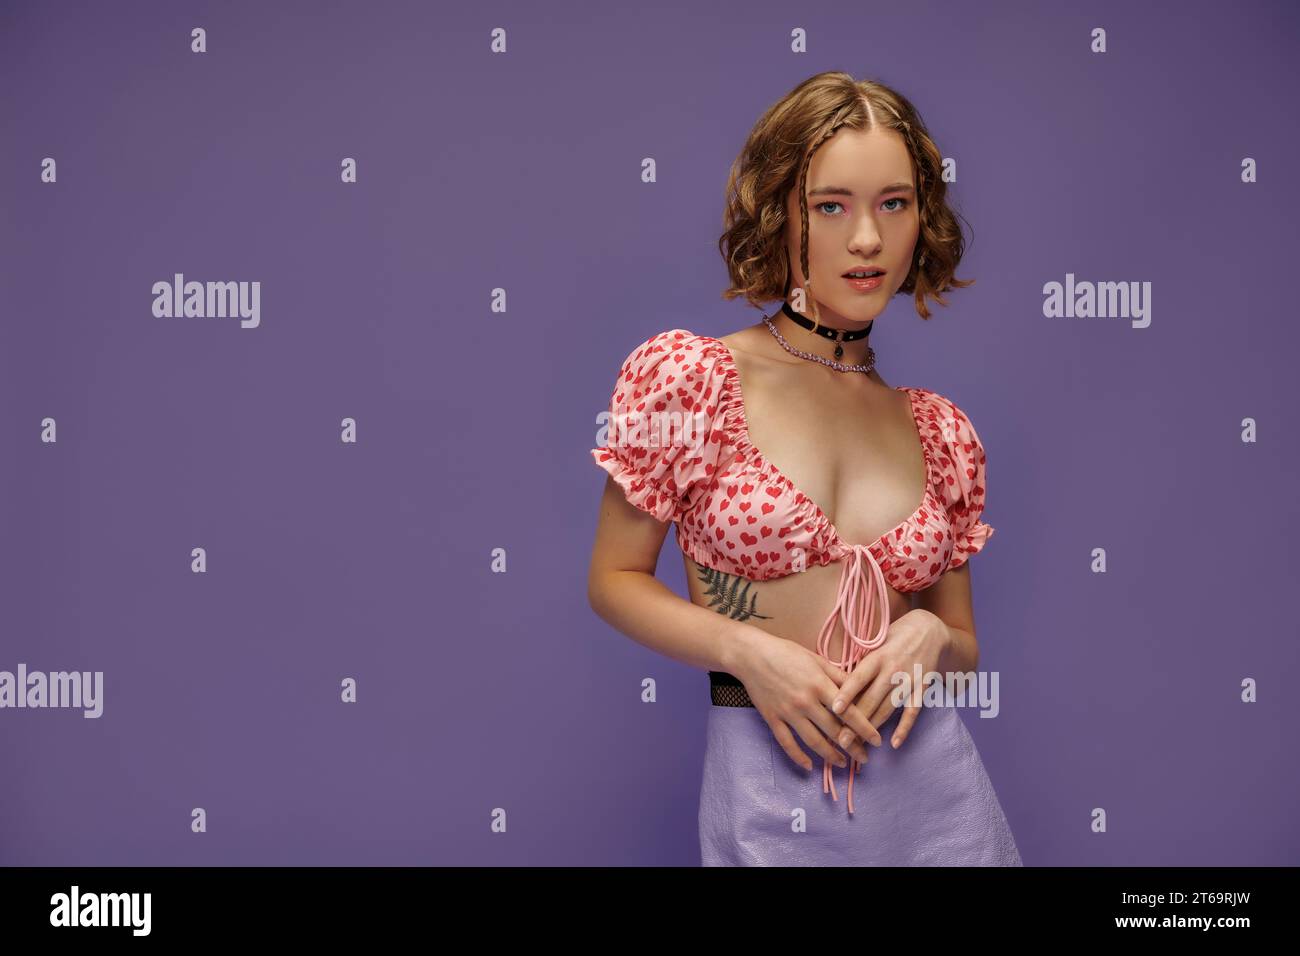 young gen z woman in cropped top with hearts pattern and skirt posing on purple background Stock Photo